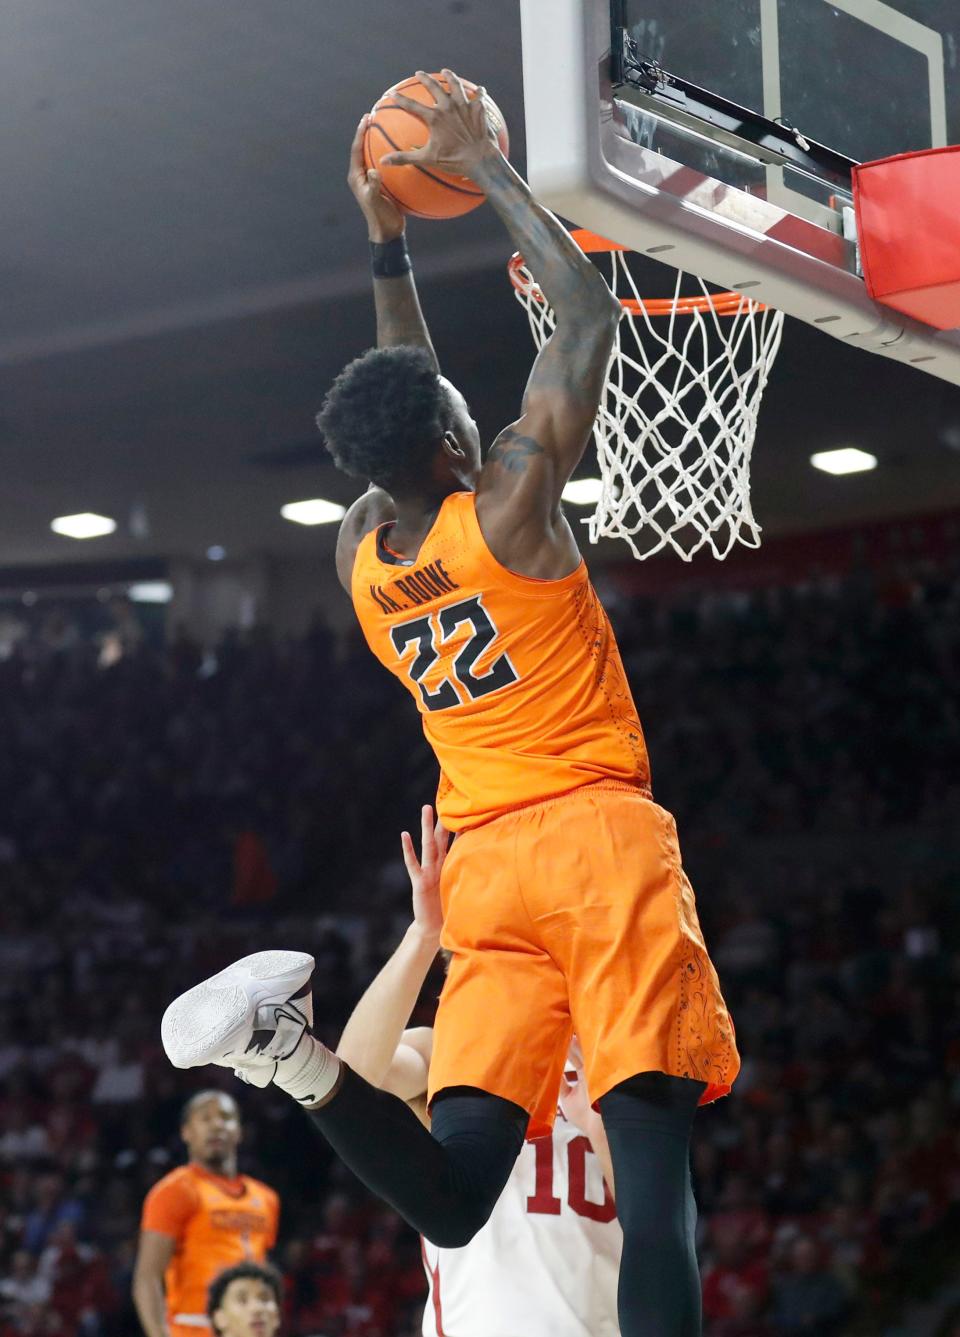 Oklahoma State's Kalib Boone (22) dunks the ball during the men's Bedlam college basketball game between the University of Oklahoma Sooners and the Oklahoma State Cowboys at Lloyd Noble Center in Norman, Okla., Tuesday, Jan.3, 2023. 